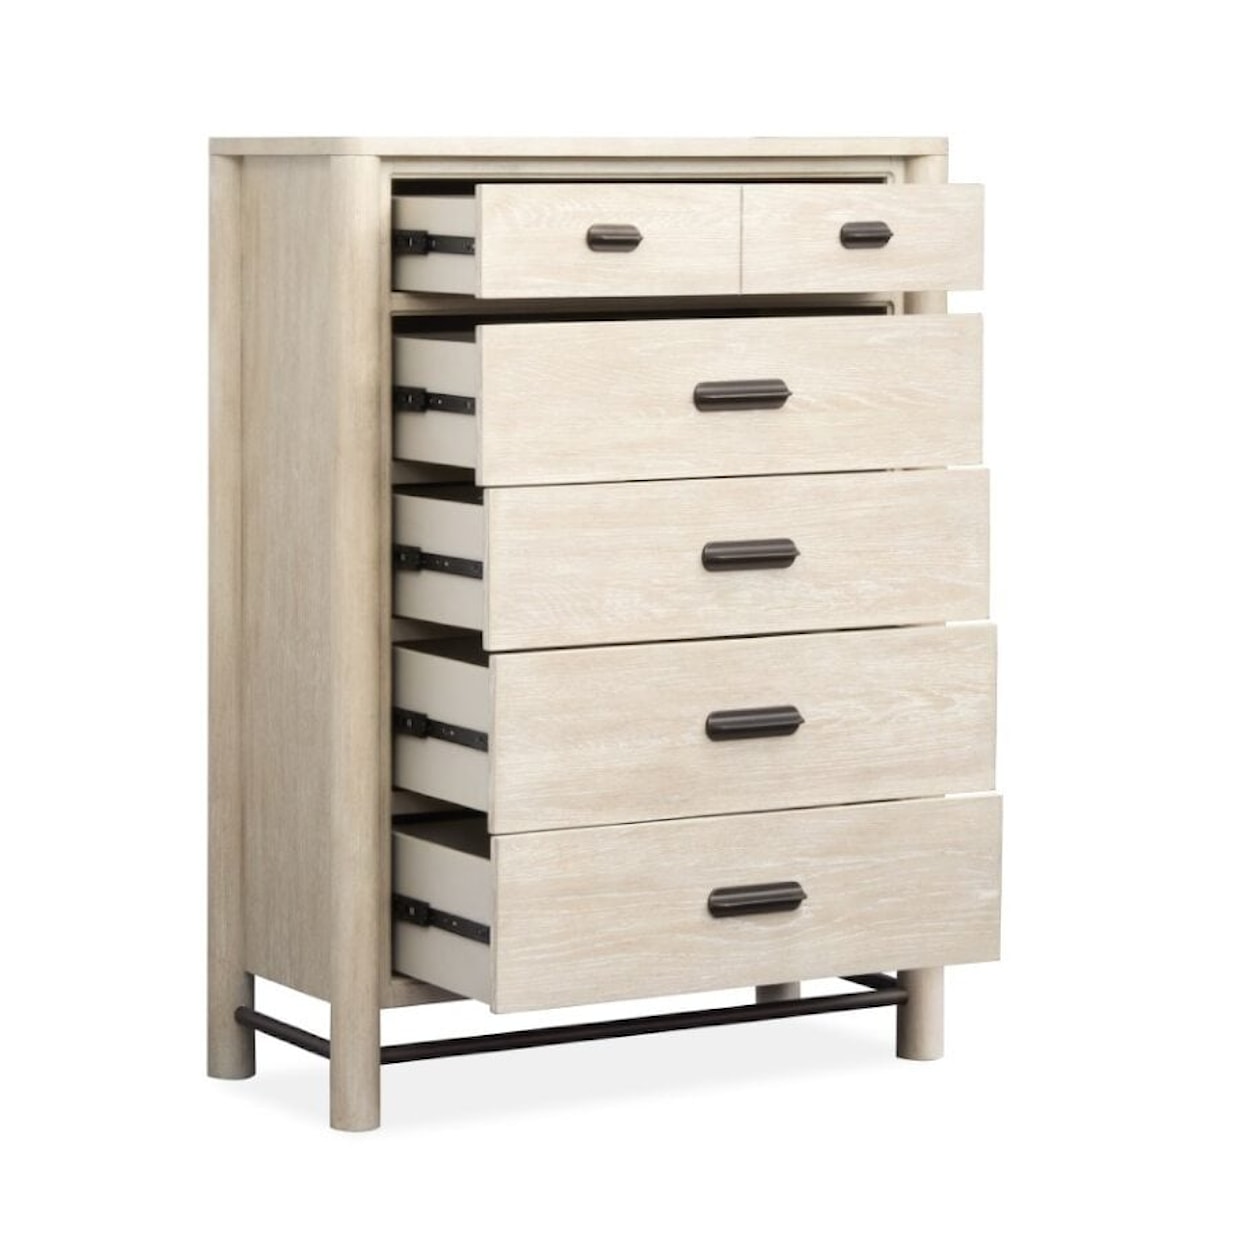 Magnussen Home Sunset Cove Bedroom Chest of Drawers